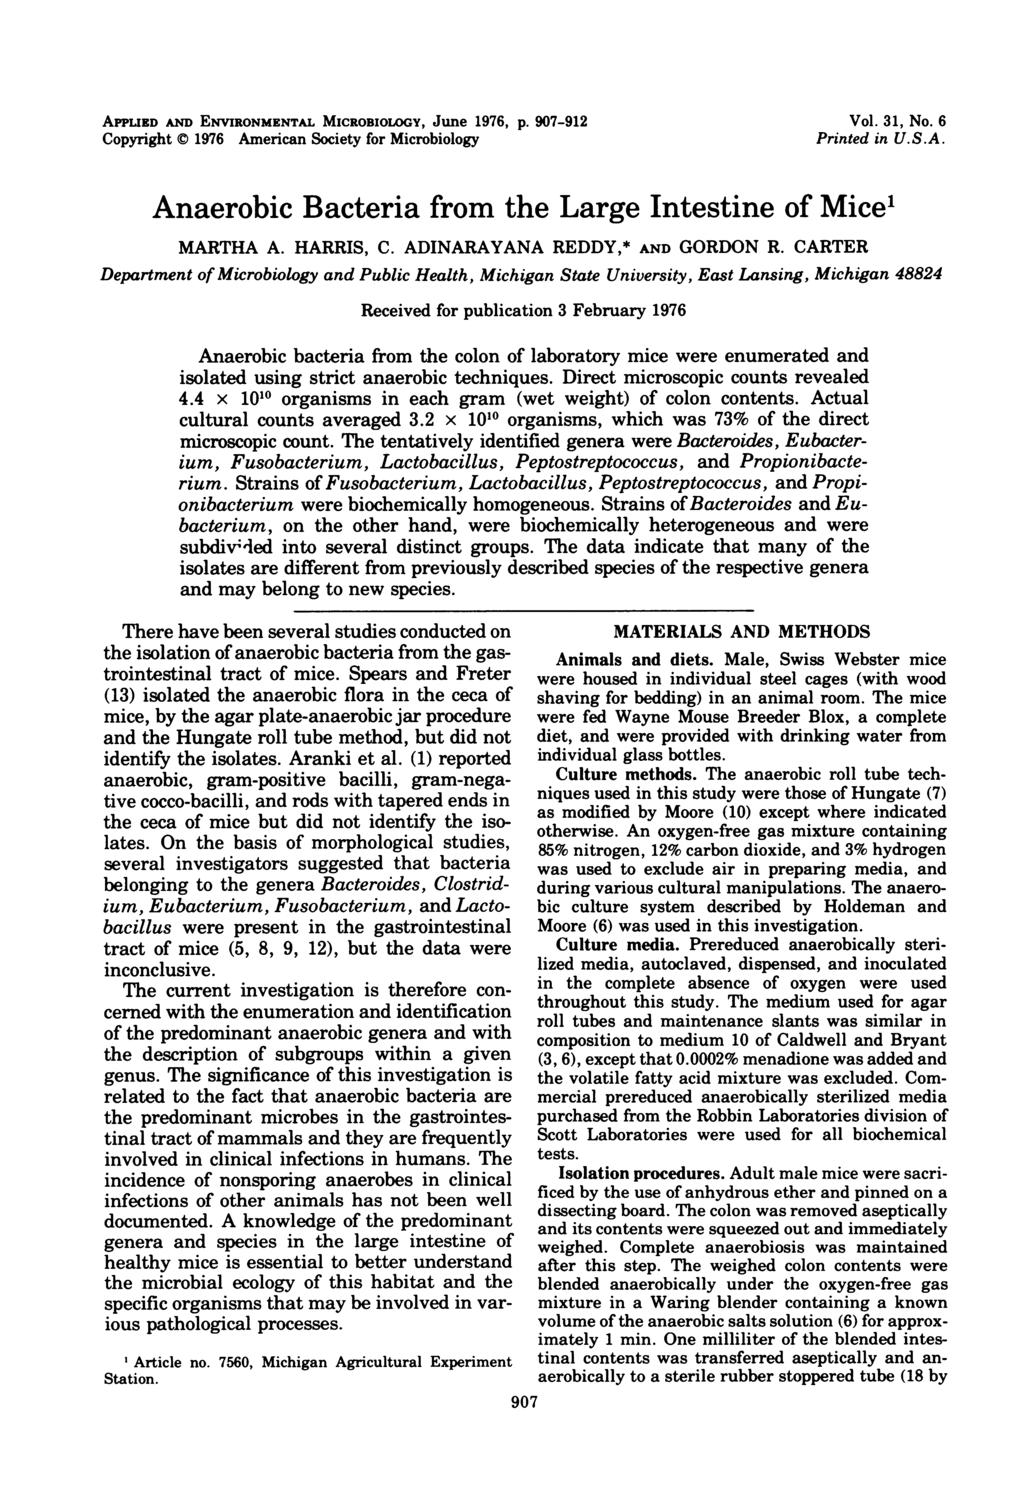 APPLIED AND ENVIRONMENTAL MICROBIOLOGY, June 1976, p. 907-912 Copyright 1976 American Society for Microbiology Vol. 31, No. 6 Printed in U.S.A. Anaerobic Bacteria from the Large Intestine of Mice1 MARTHA A.